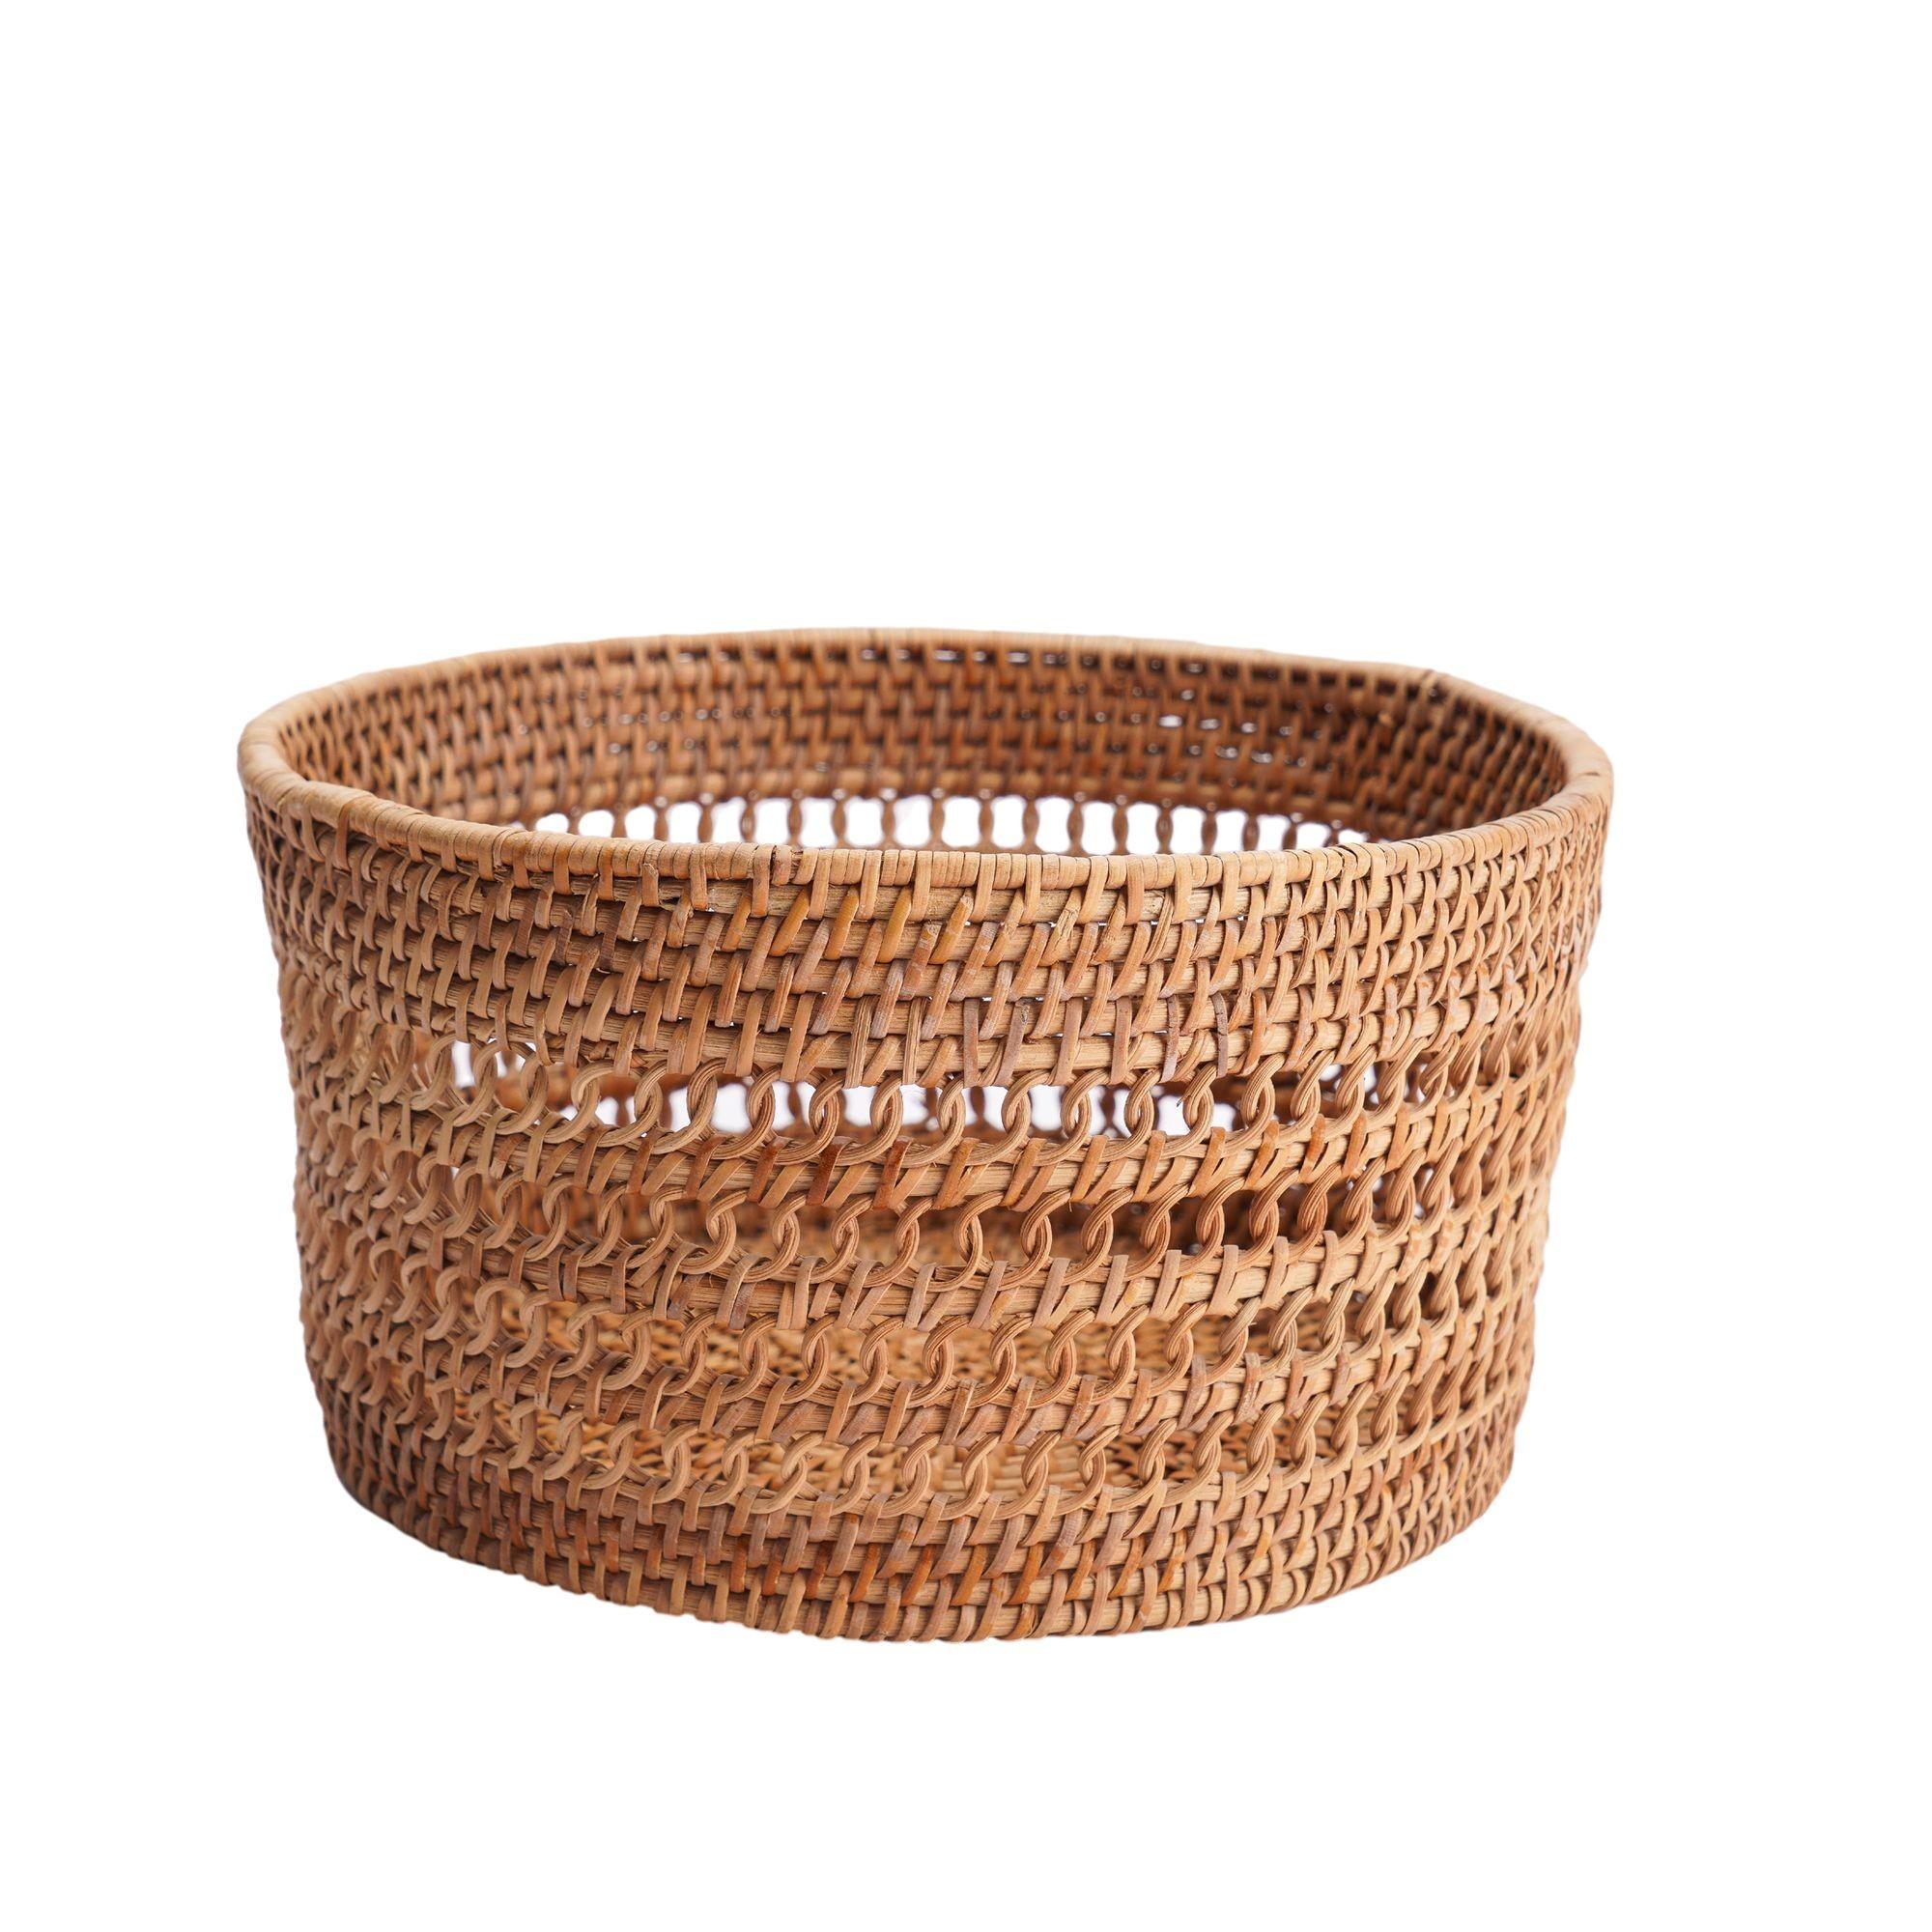 Woven split bamboo and rattan cylinder form basket. The rattan is coiled in six rows and lashed together with bamboo at the rim of the basket and three rows at the bottom of the basket. Between are three single coils of rattan joined by continuous